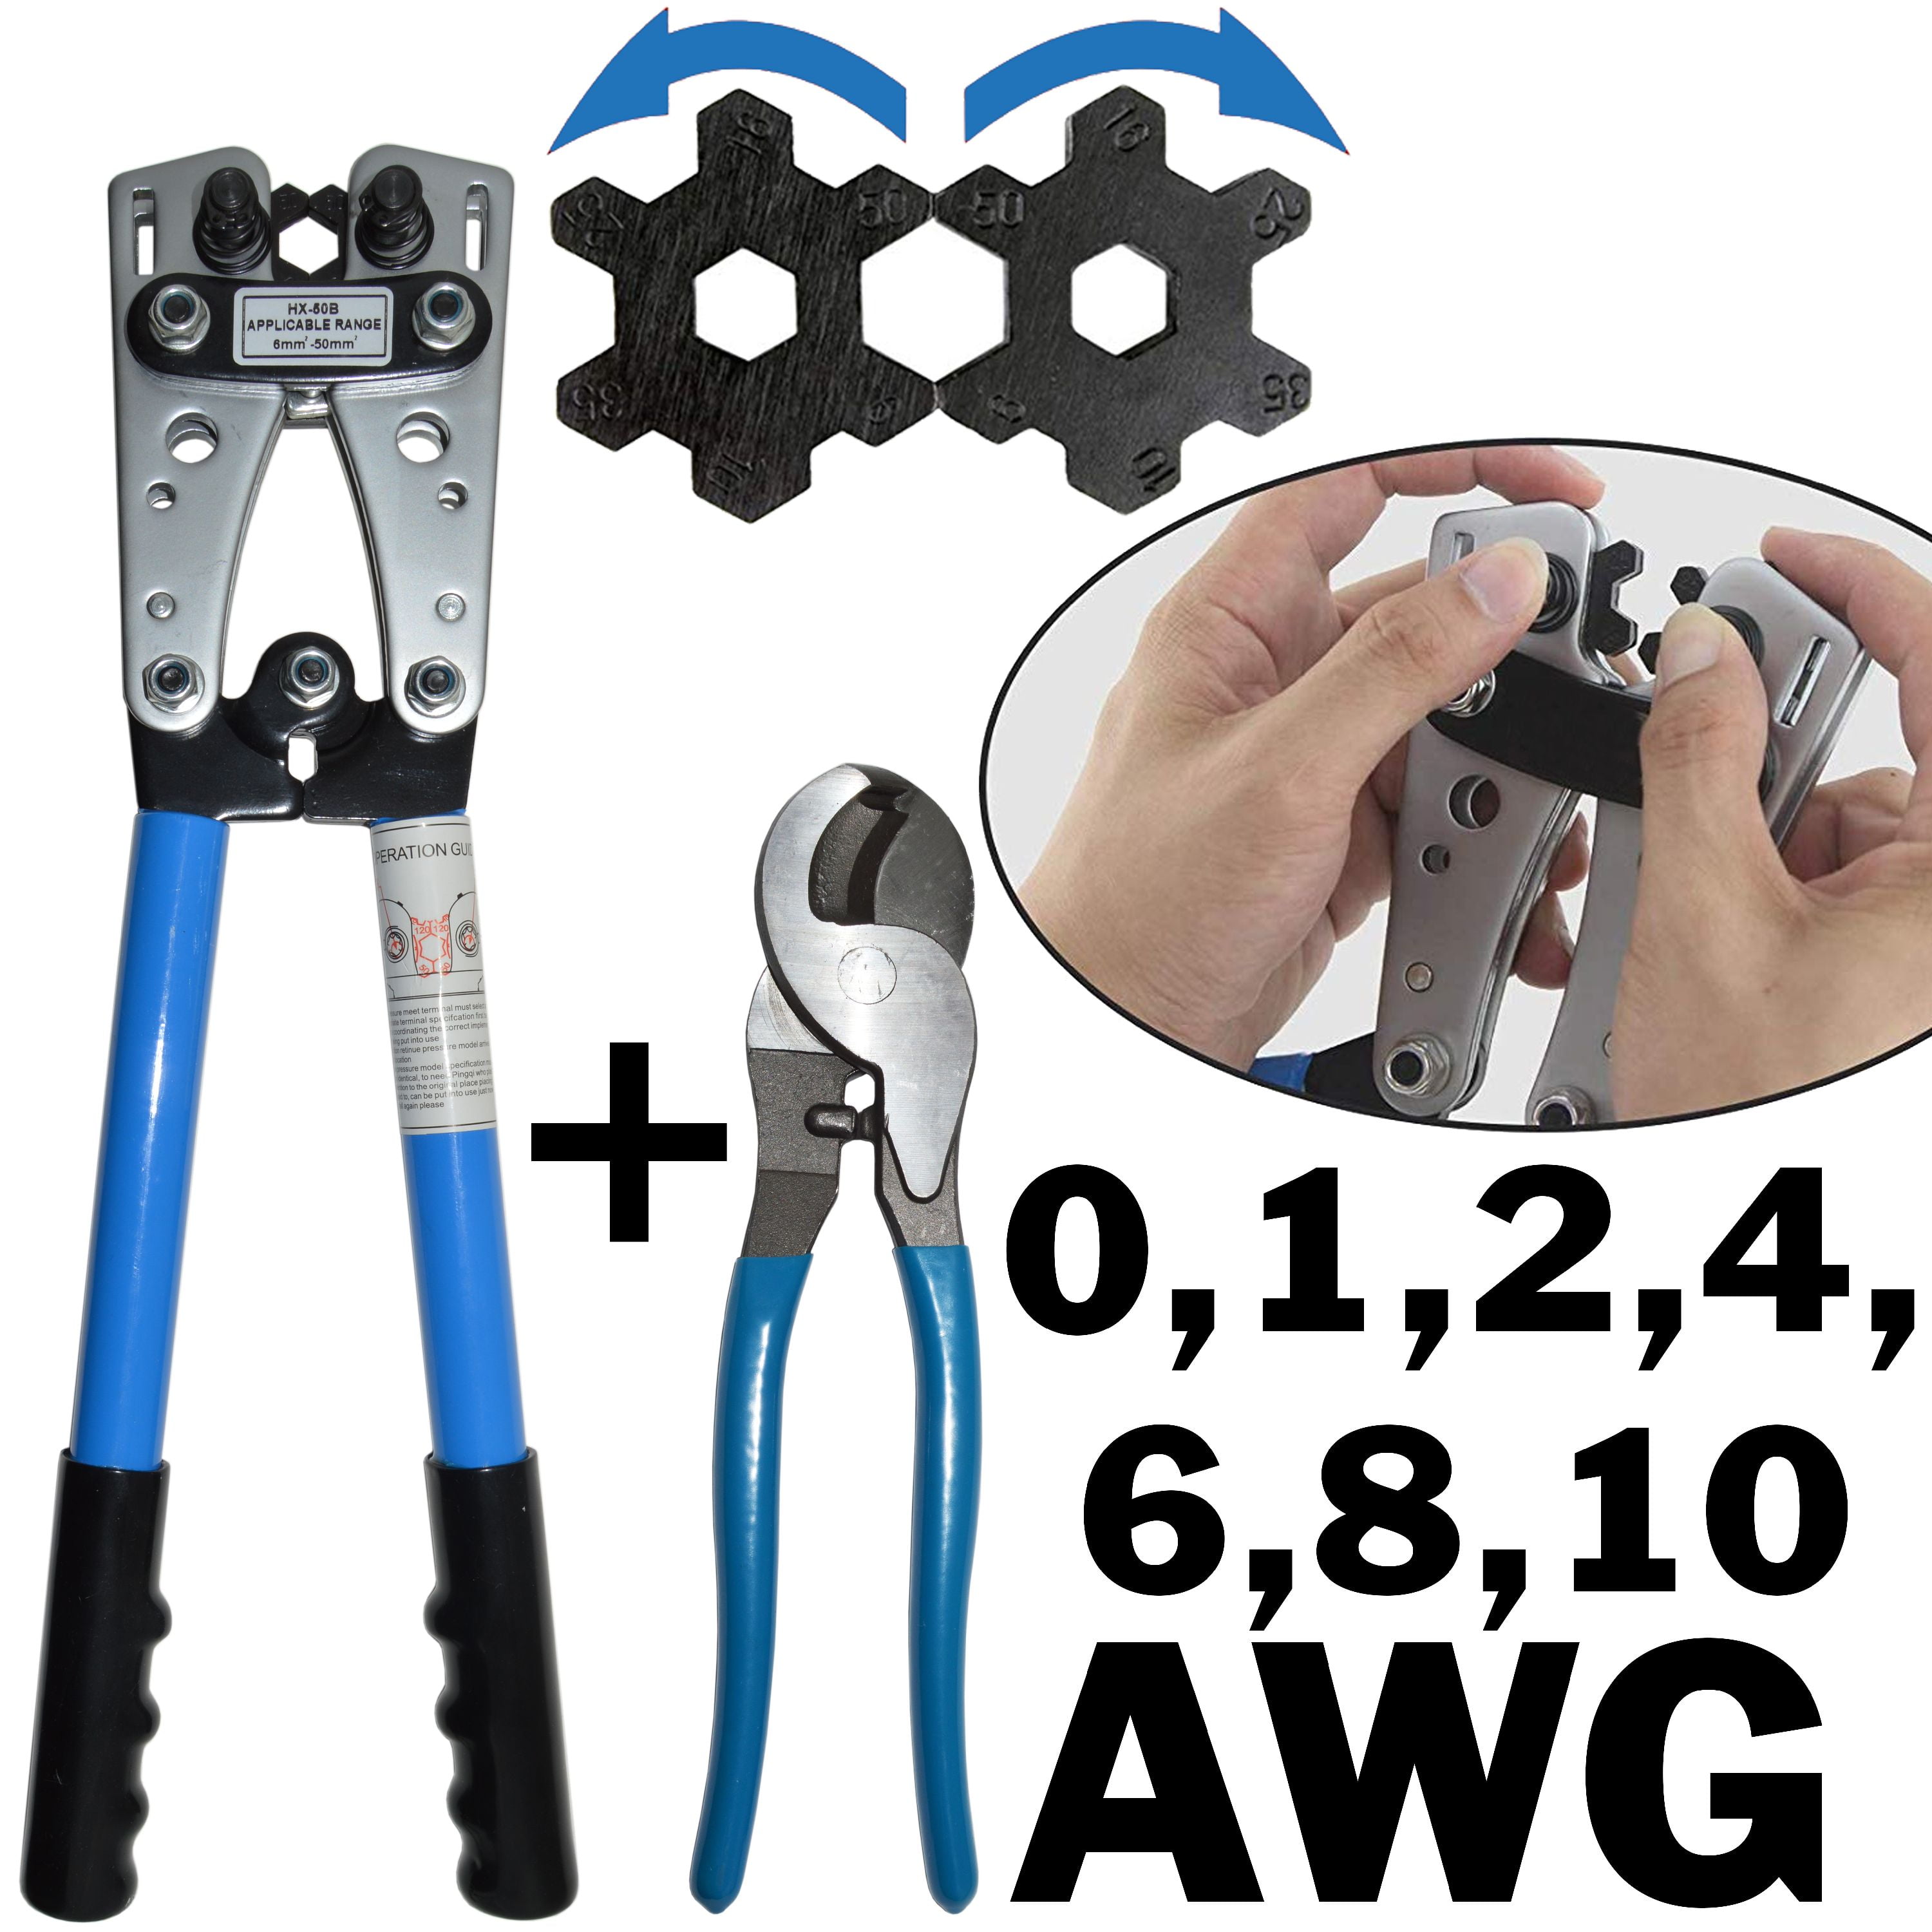 Pro Wire Cable Stripper Cutter Stripping Crimper Pliers Electrician Hand Tool 